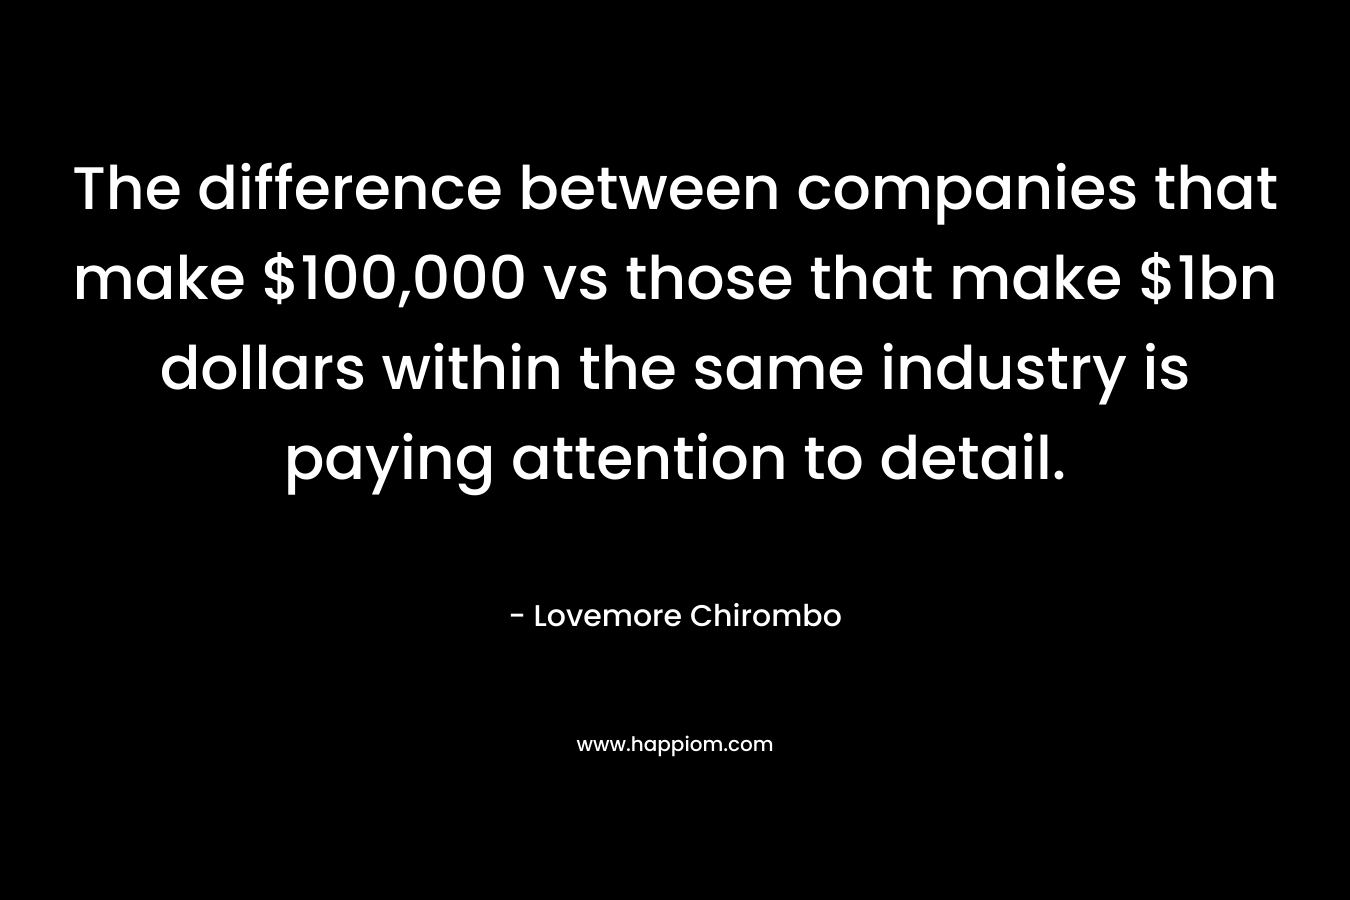 The difference between companies that make $100,000 vs those that make $1bn dollars within the same industry is paying attention to detail. – Lovemore Chirombo